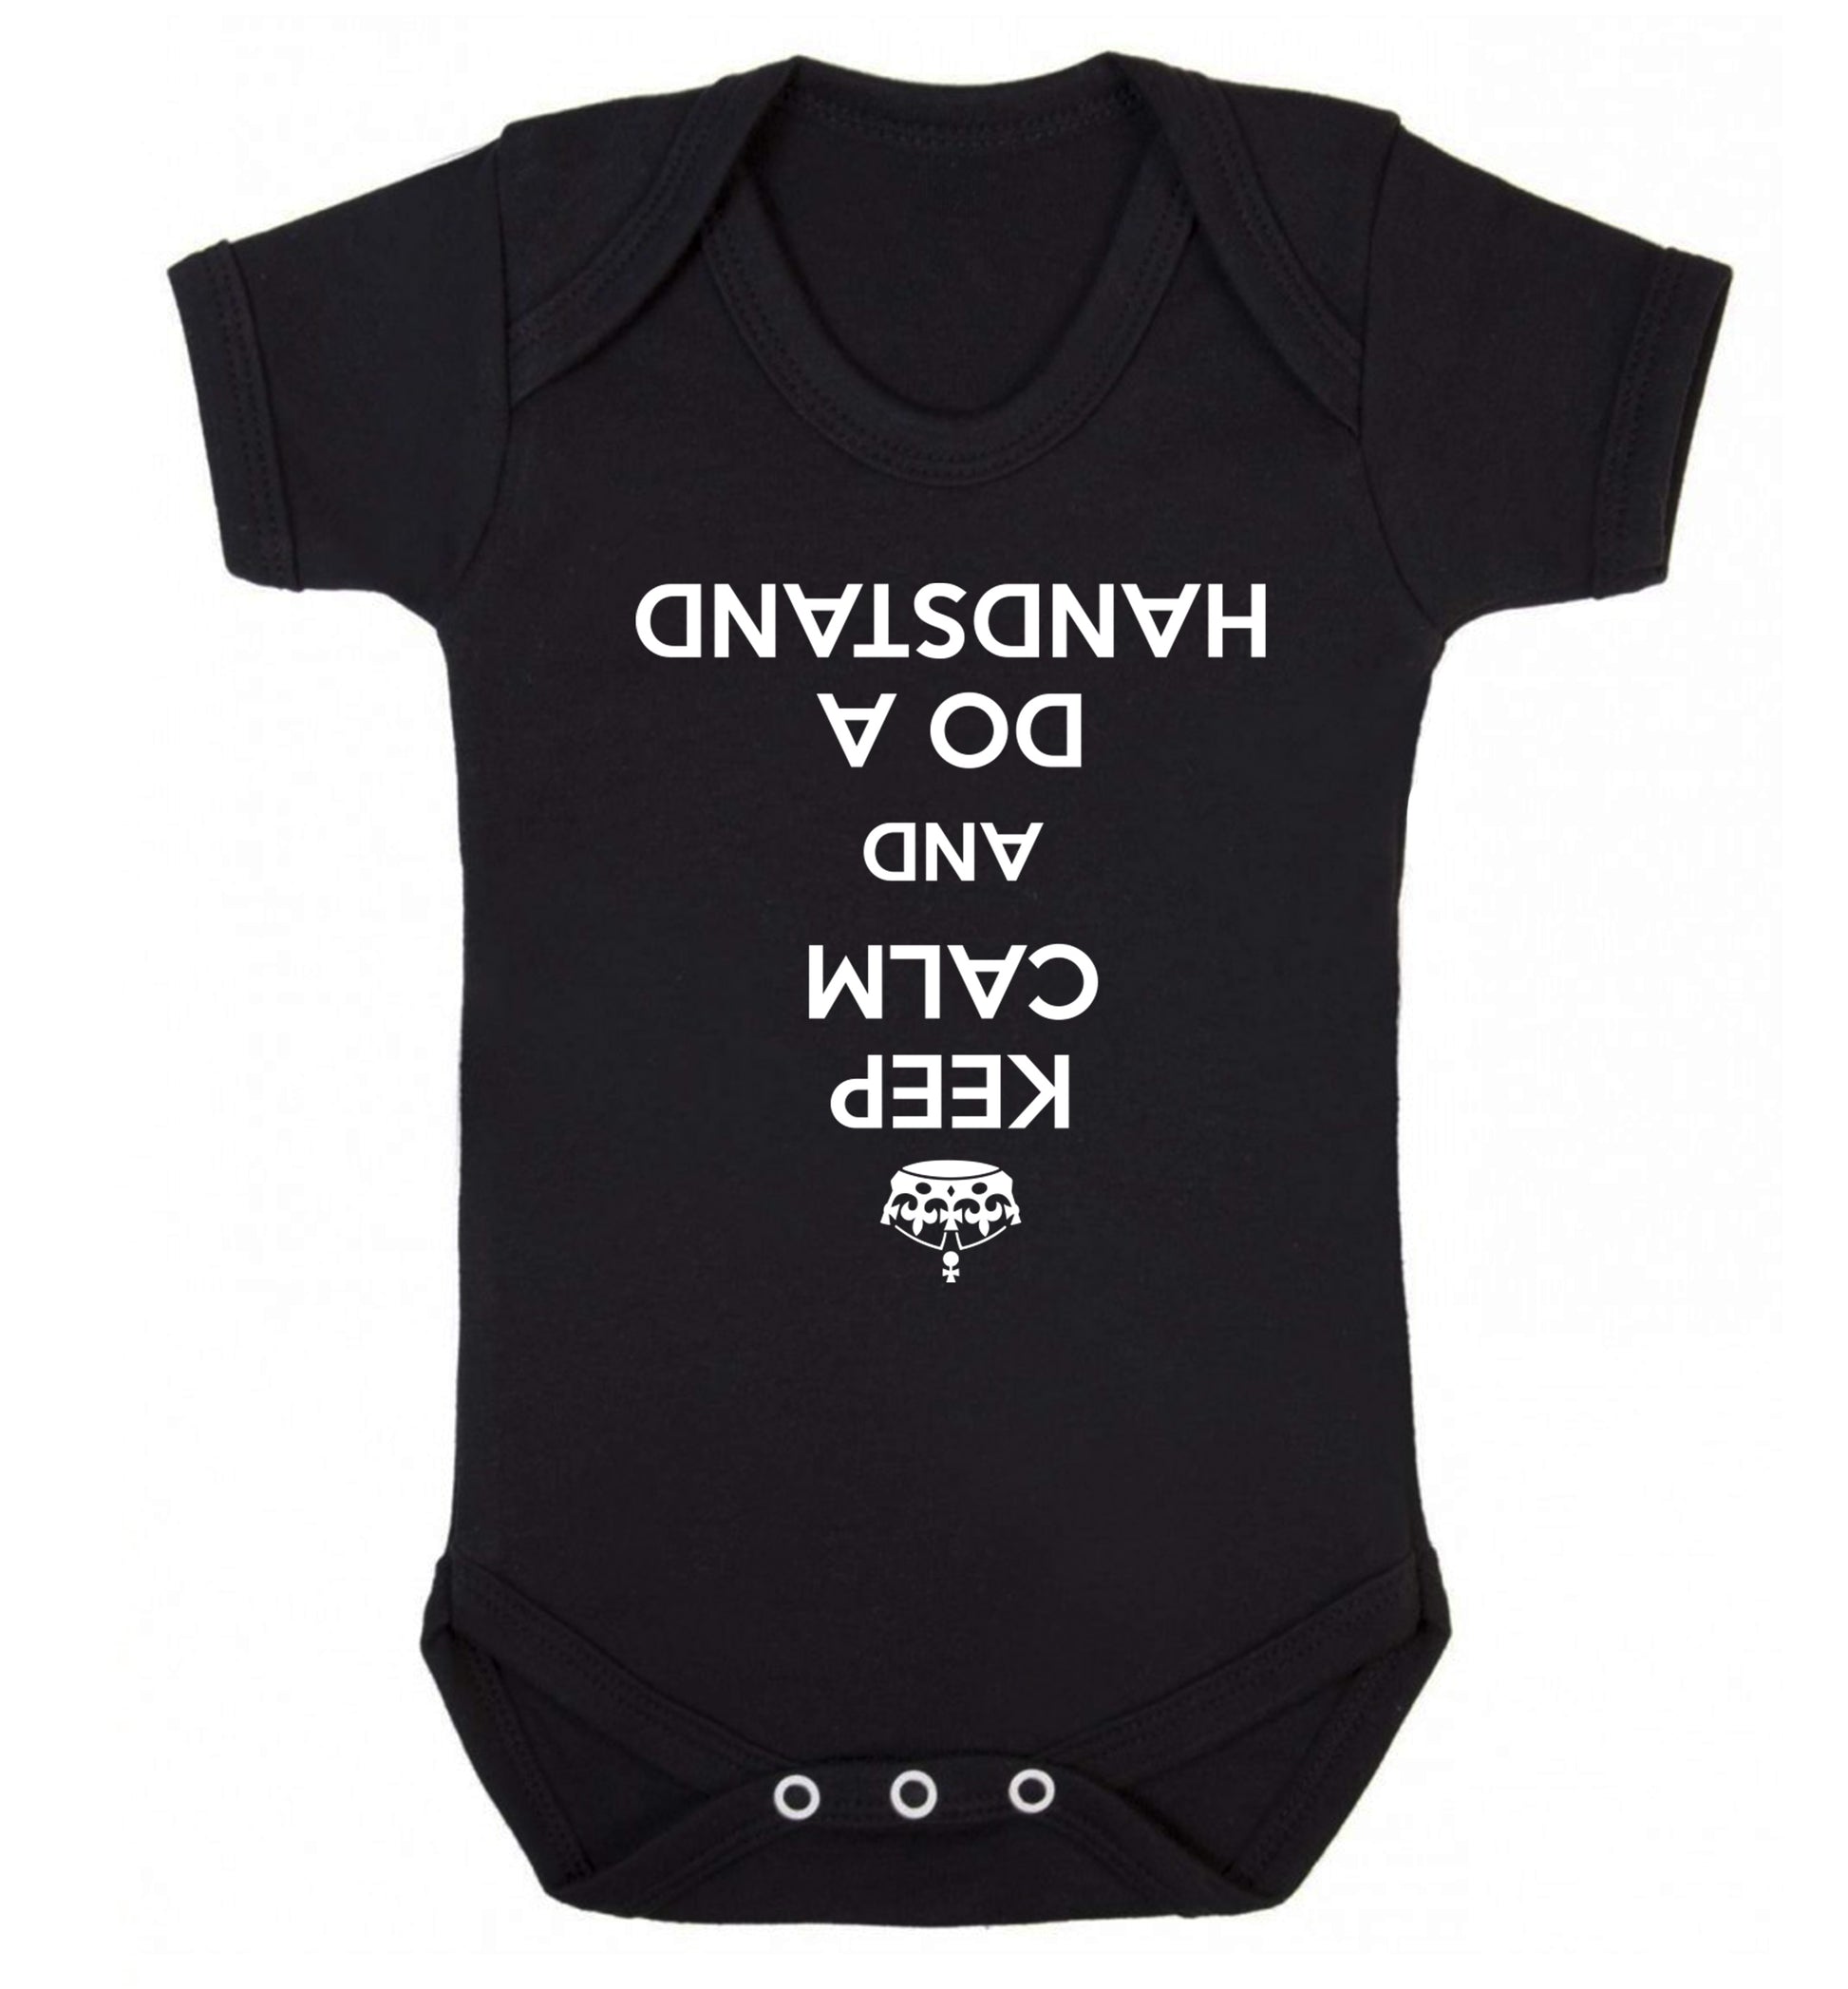 Keep calm and do a handstand Baby Vest black 18-24 months